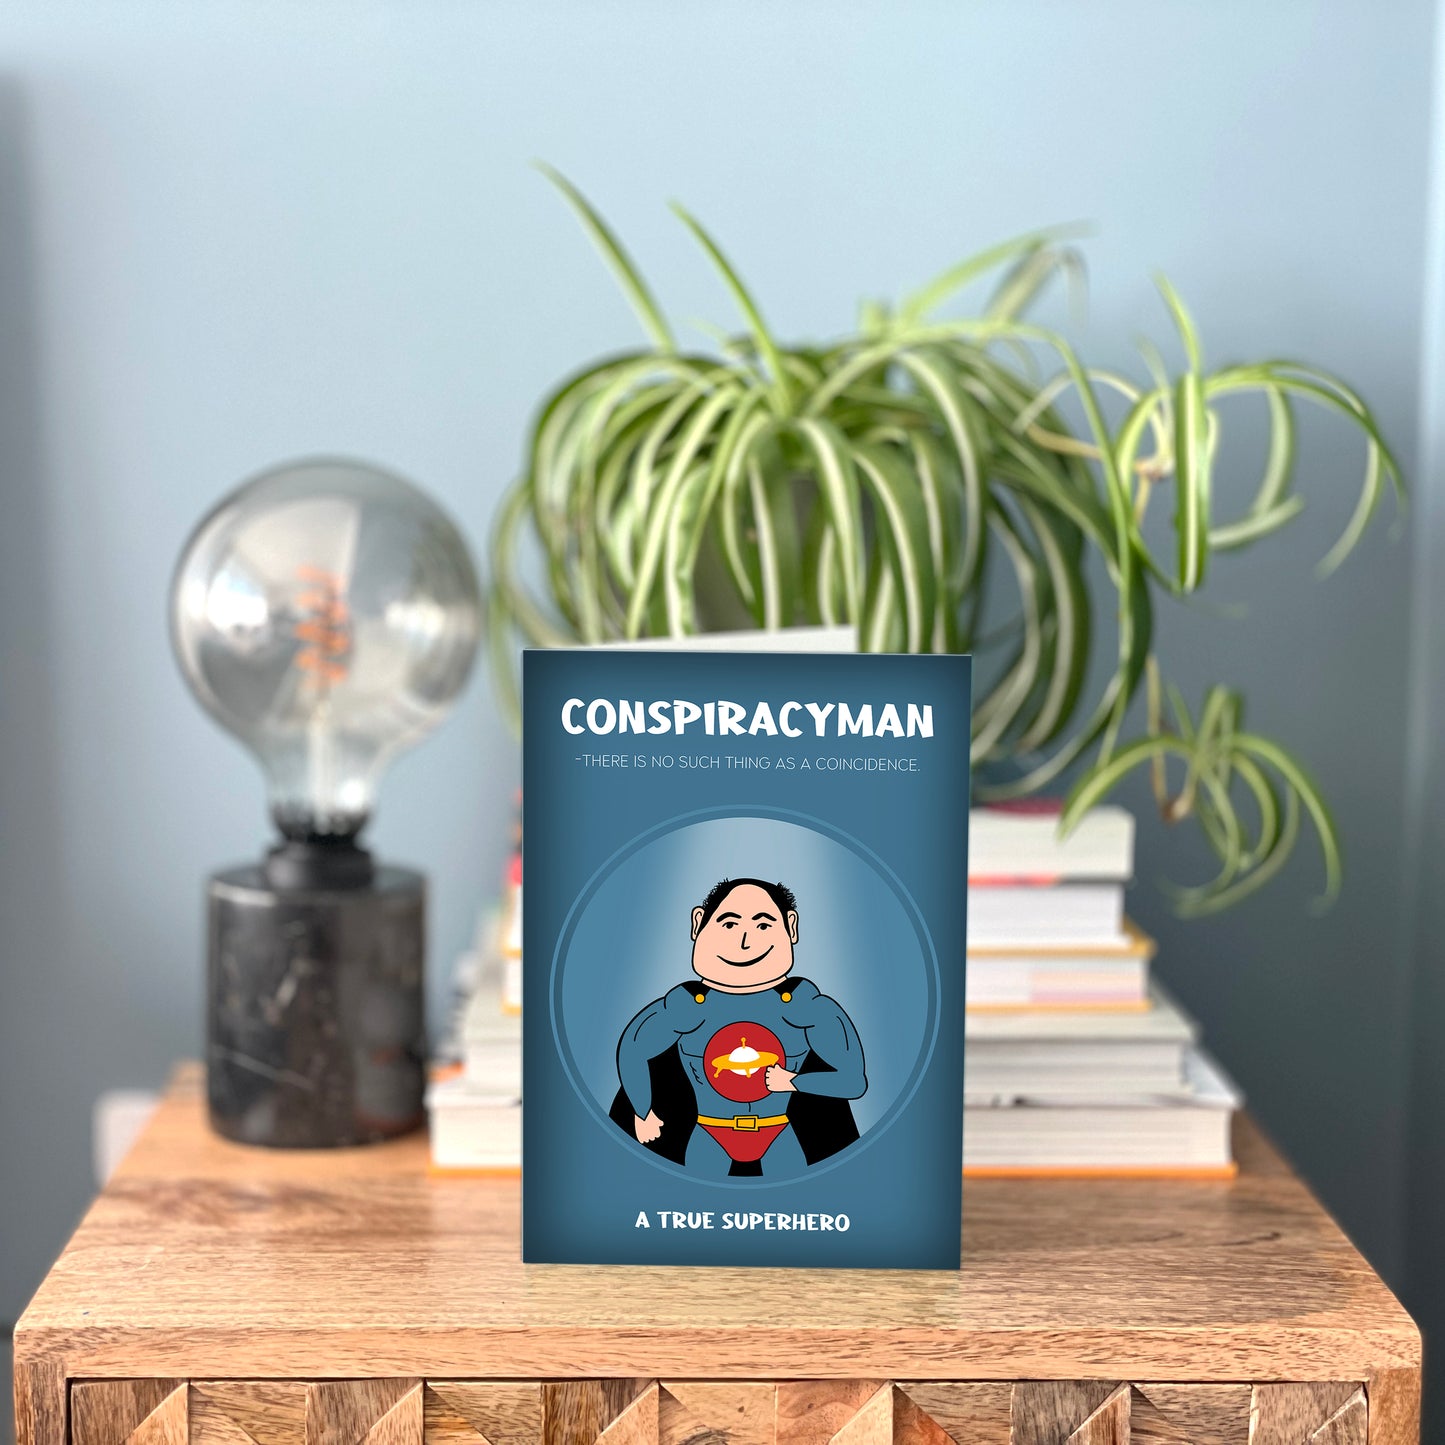 Funny Father's Day Card - Conspiracyman - For Superhero Dads Who Don't Believe In Coincidences